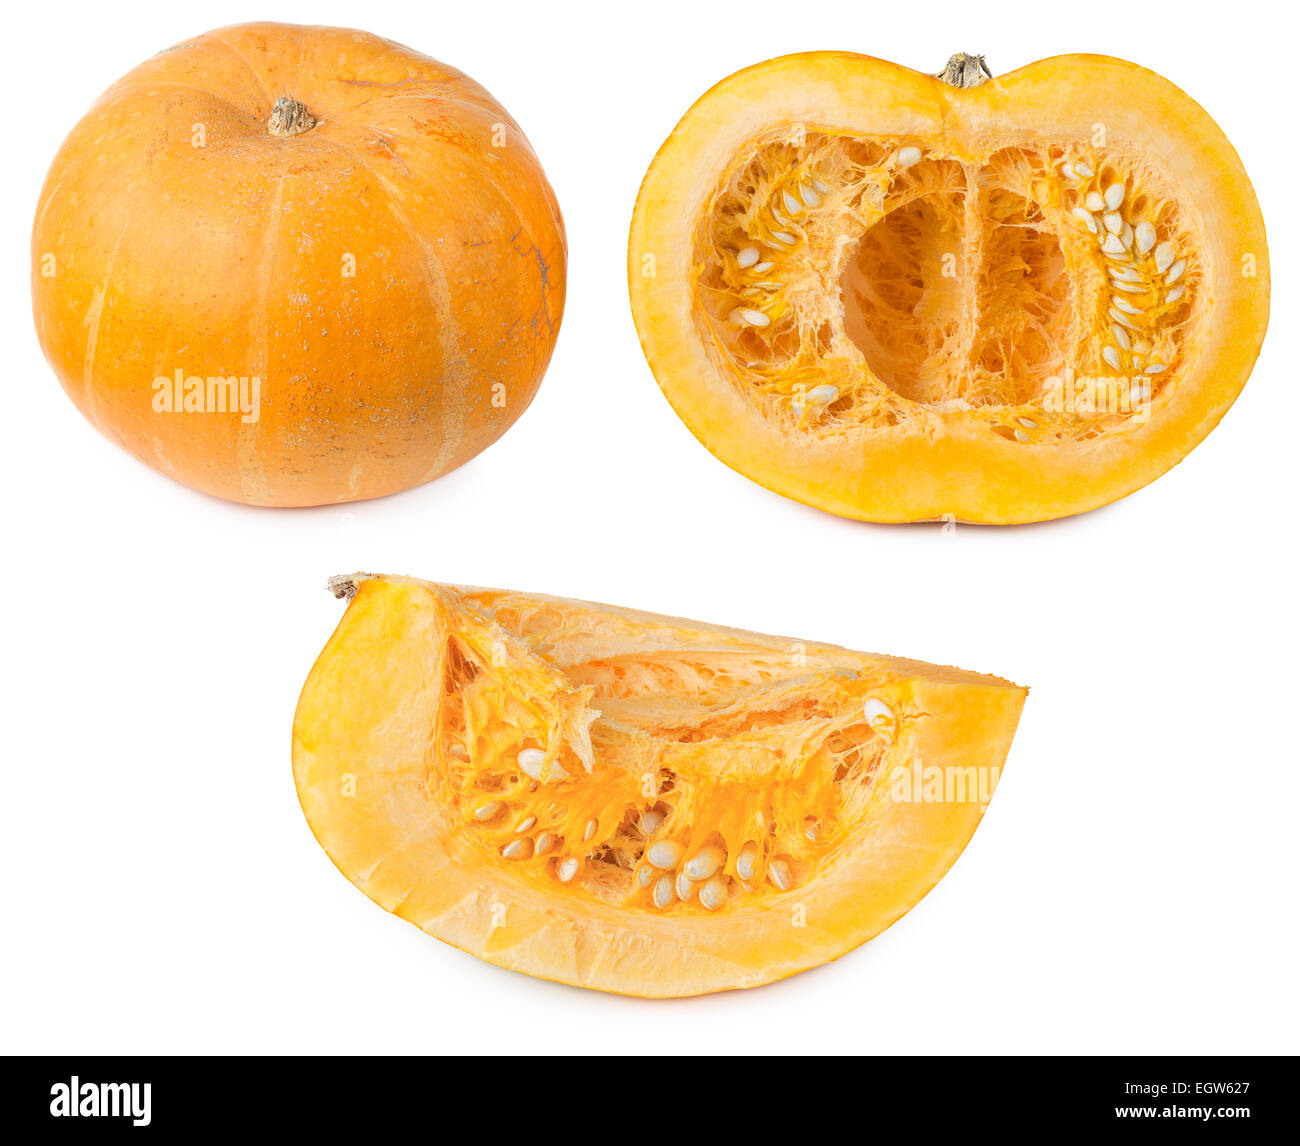 Round orange pumpkin cut in half and slice, isolated on a white background Stock Photo